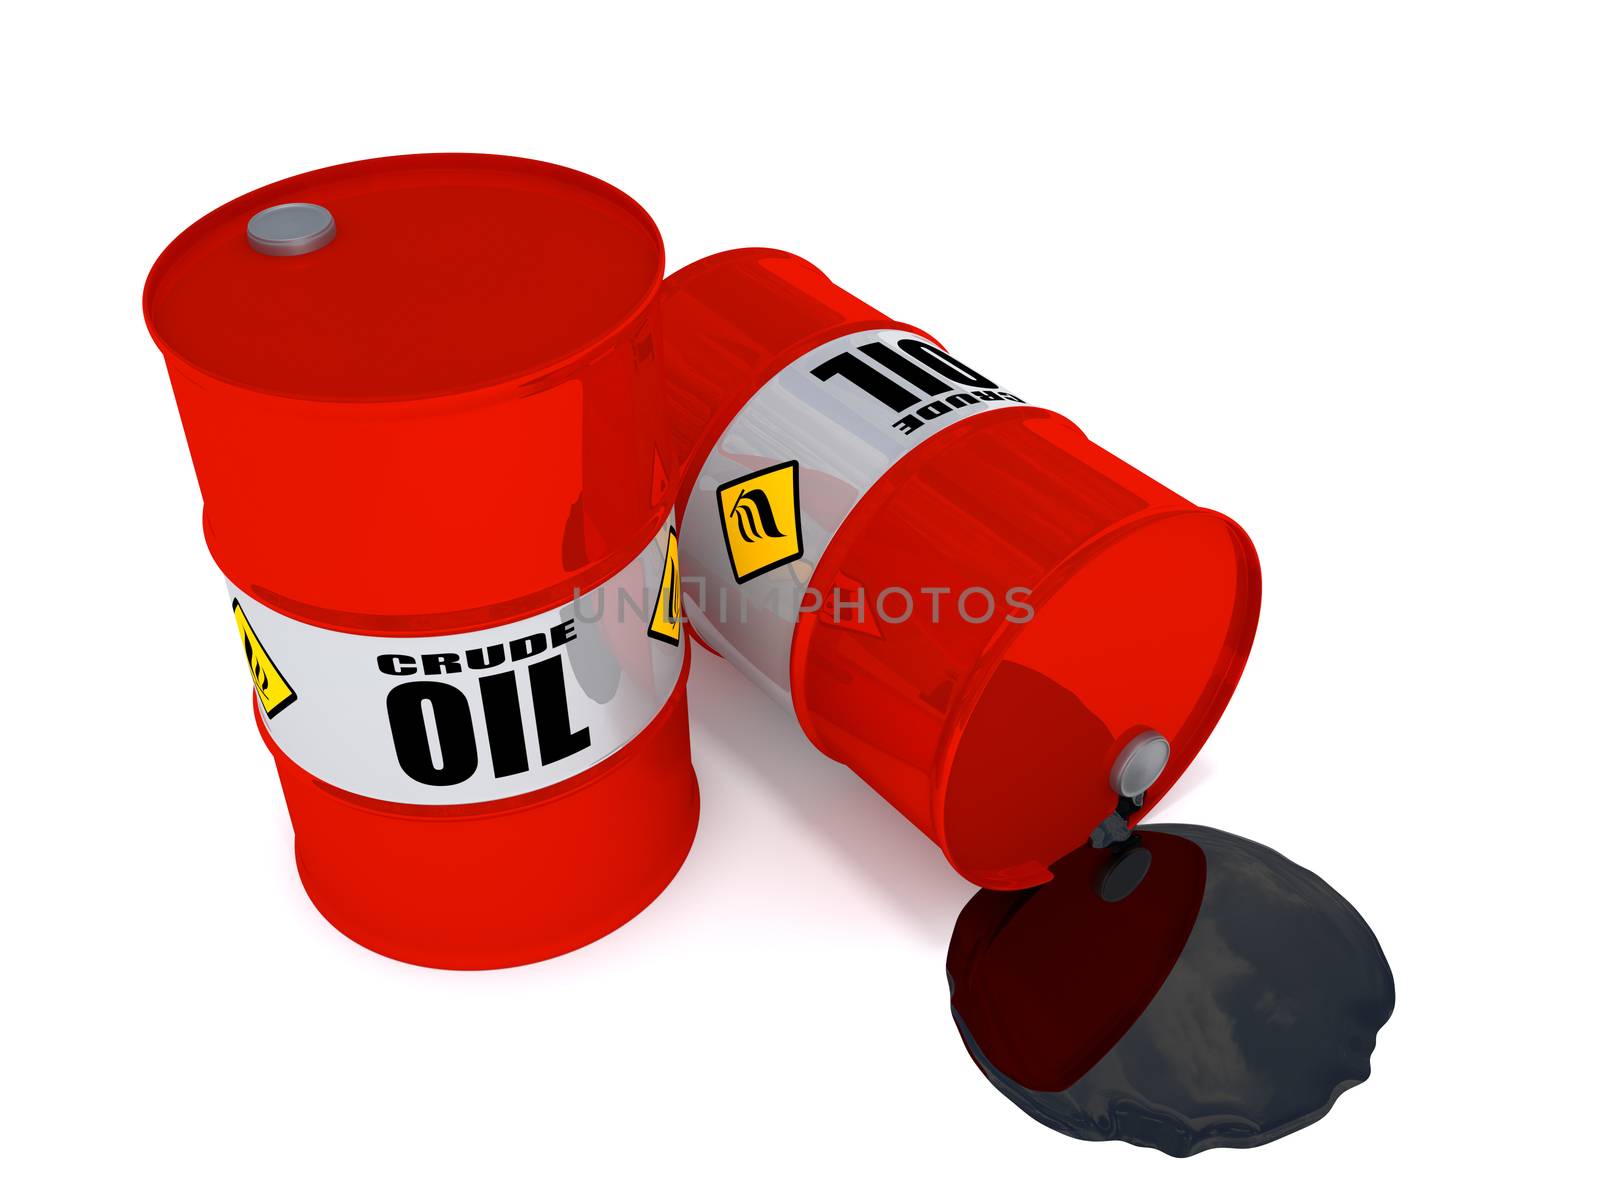 2 oil drums, one on his side is leaking crude oil